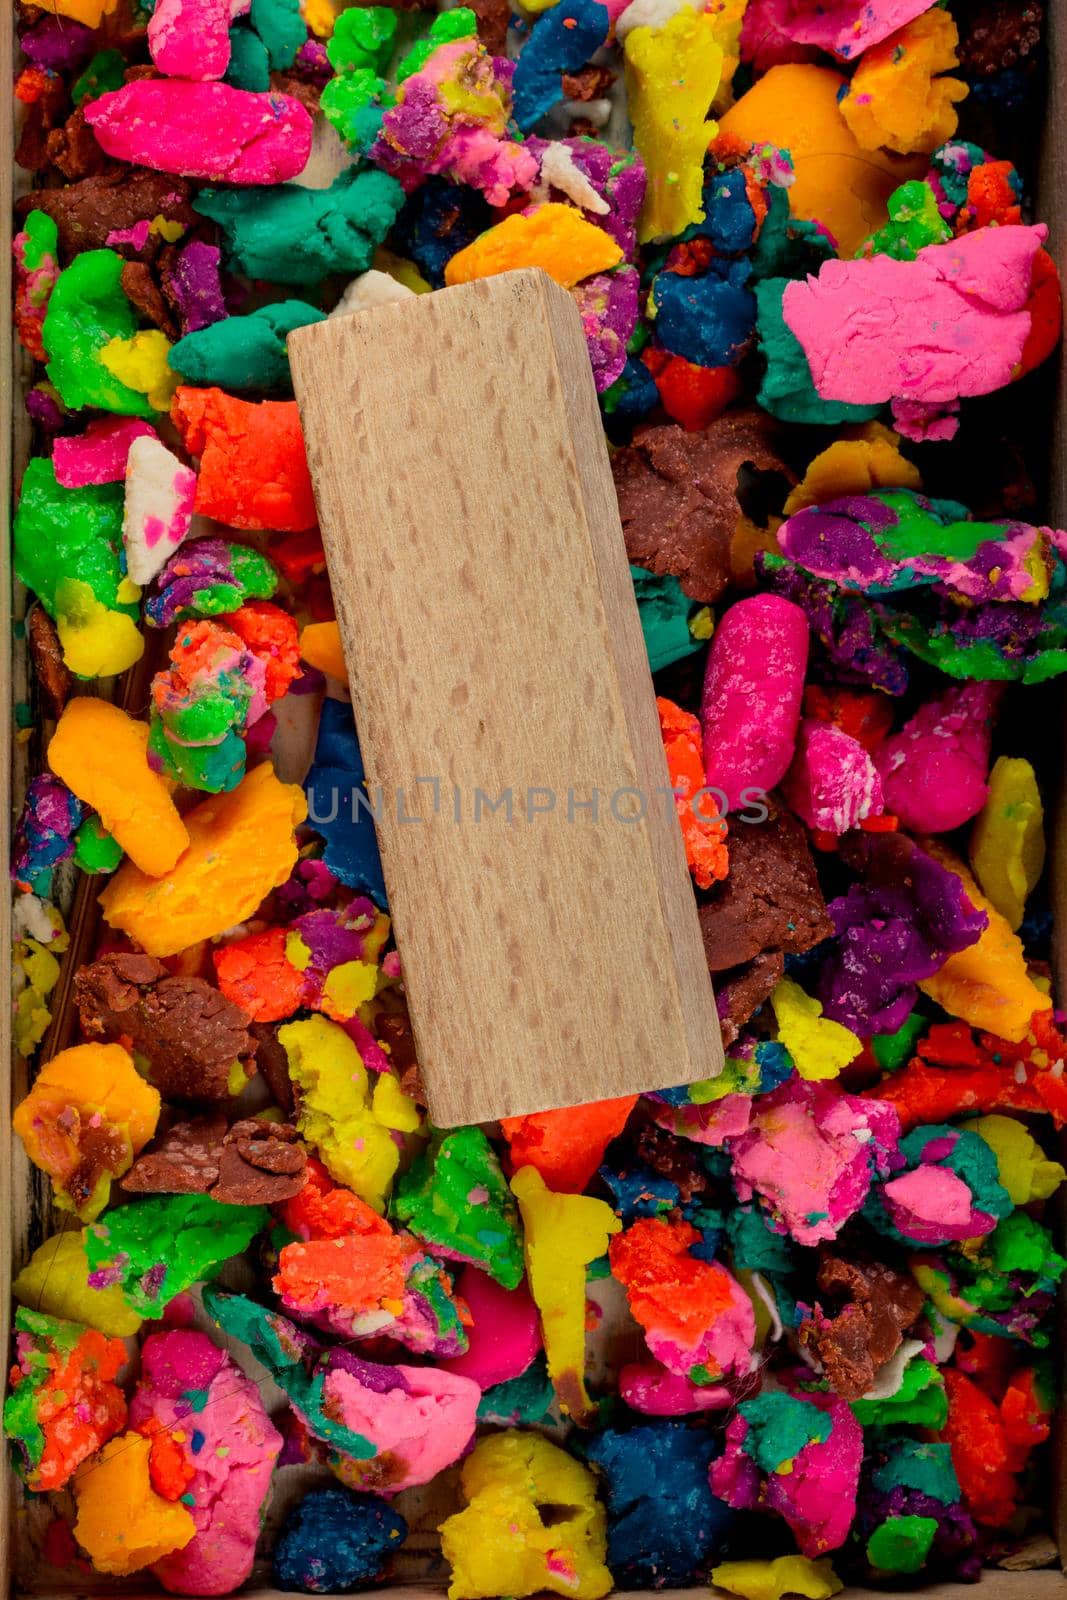 Piece of wood on colorful play dough in smal pieces